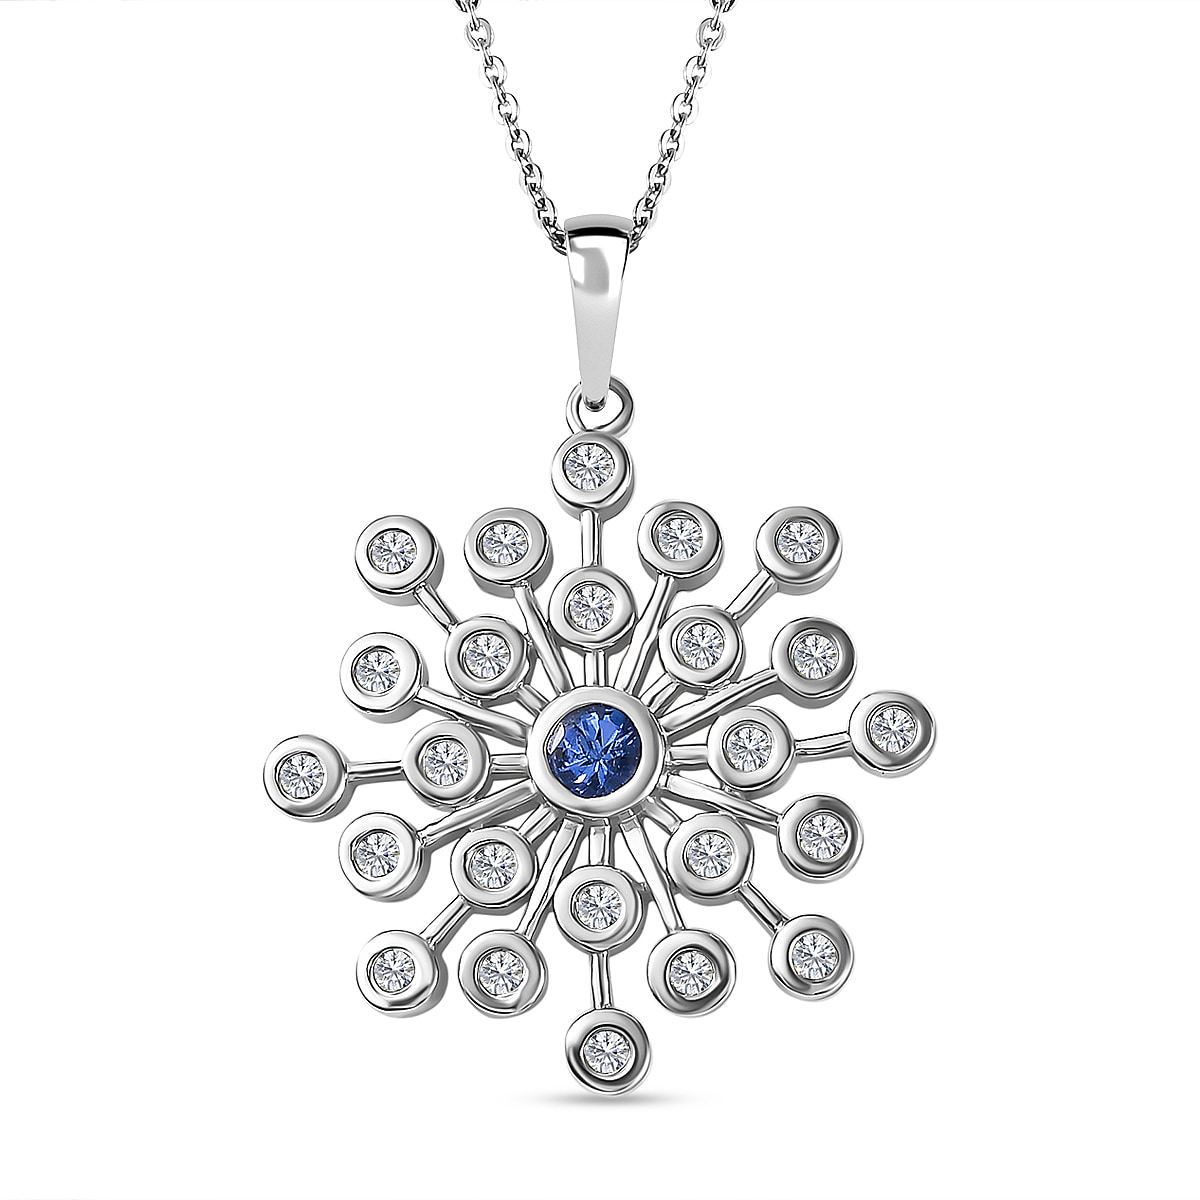 Tanzanite & Natural Zircon Snowflake Pendant with Chain (Size 20) in Platinum Overlay Sterling Silver 1.55 Ct, Silver Wt. 7.20 Gms